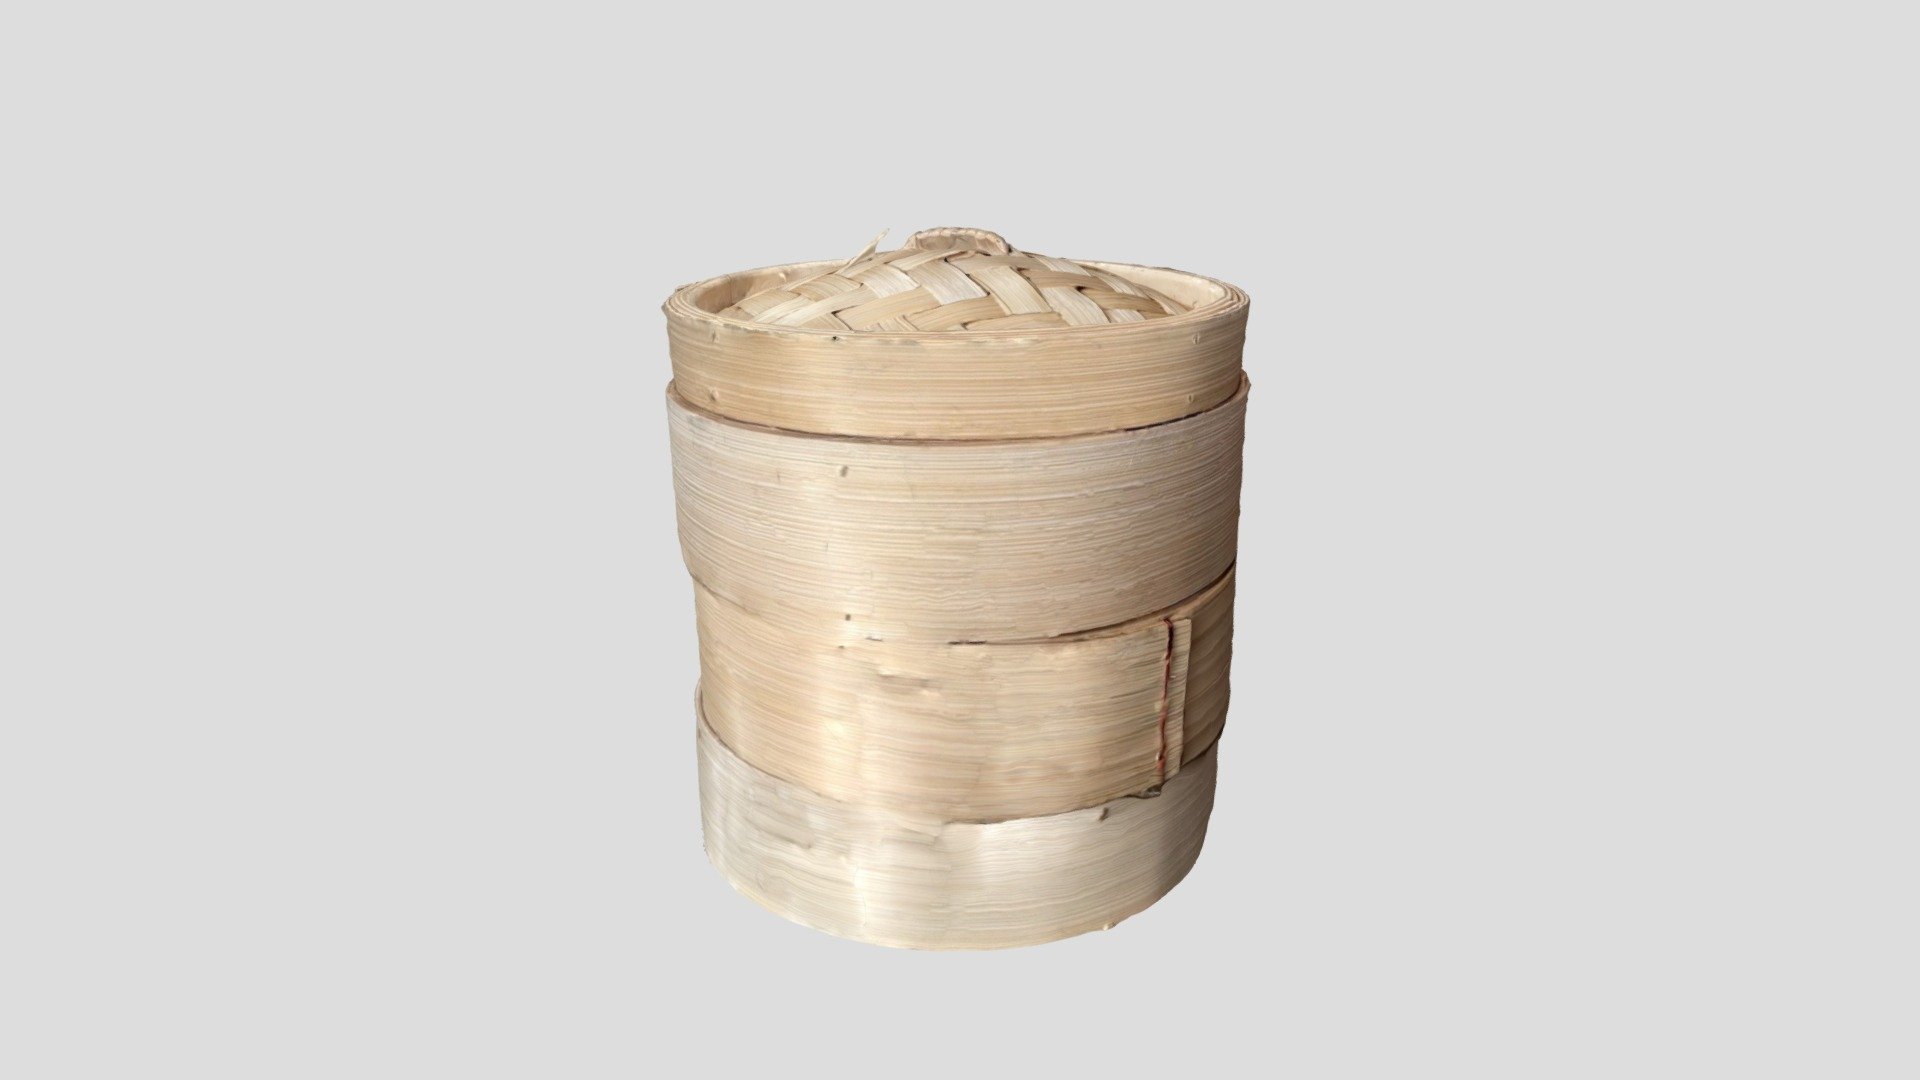 Bamboo steamer baskets

Created with Polycam - Bamboo steamer baskets - Download Free 3D model by Karolisbutenas 3d model